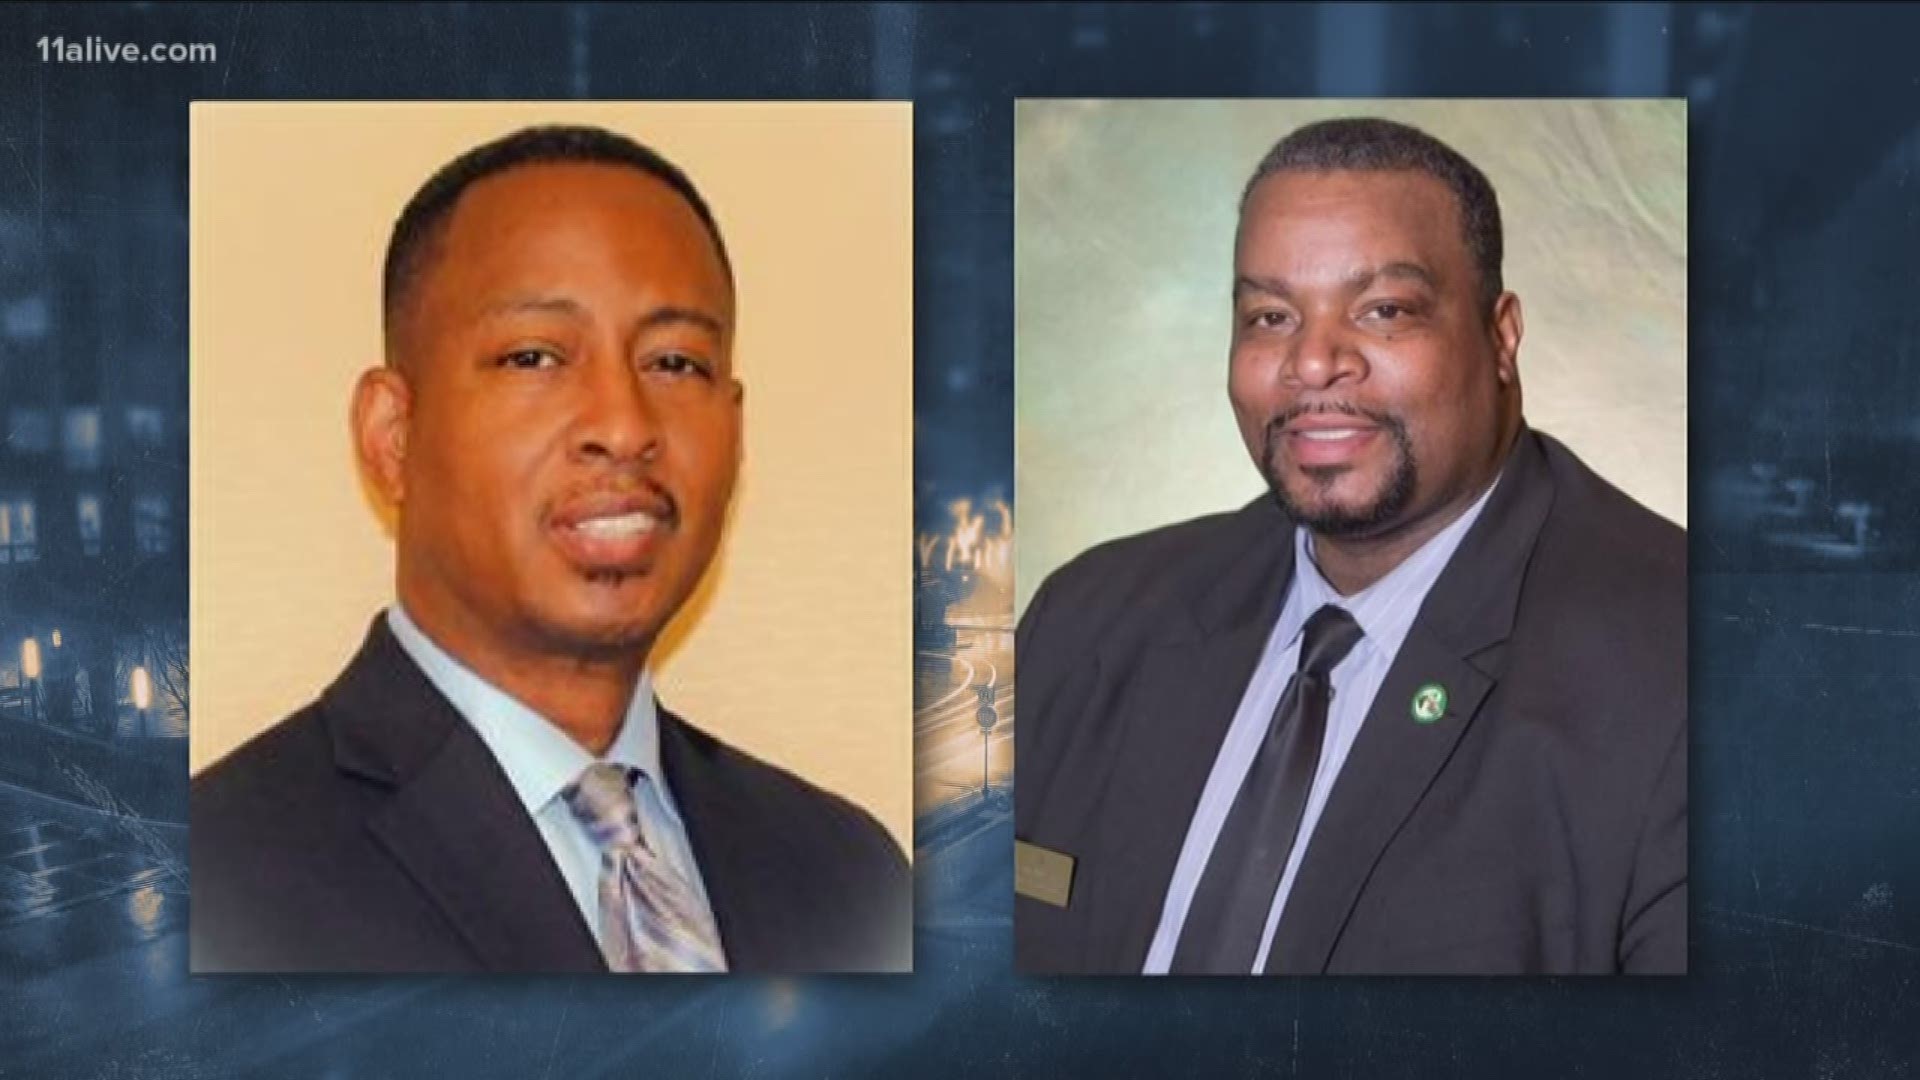 Council members John Blount and Elton Alexander sat in the same room Tuesday for the first time since an investigation into what happened was launched.